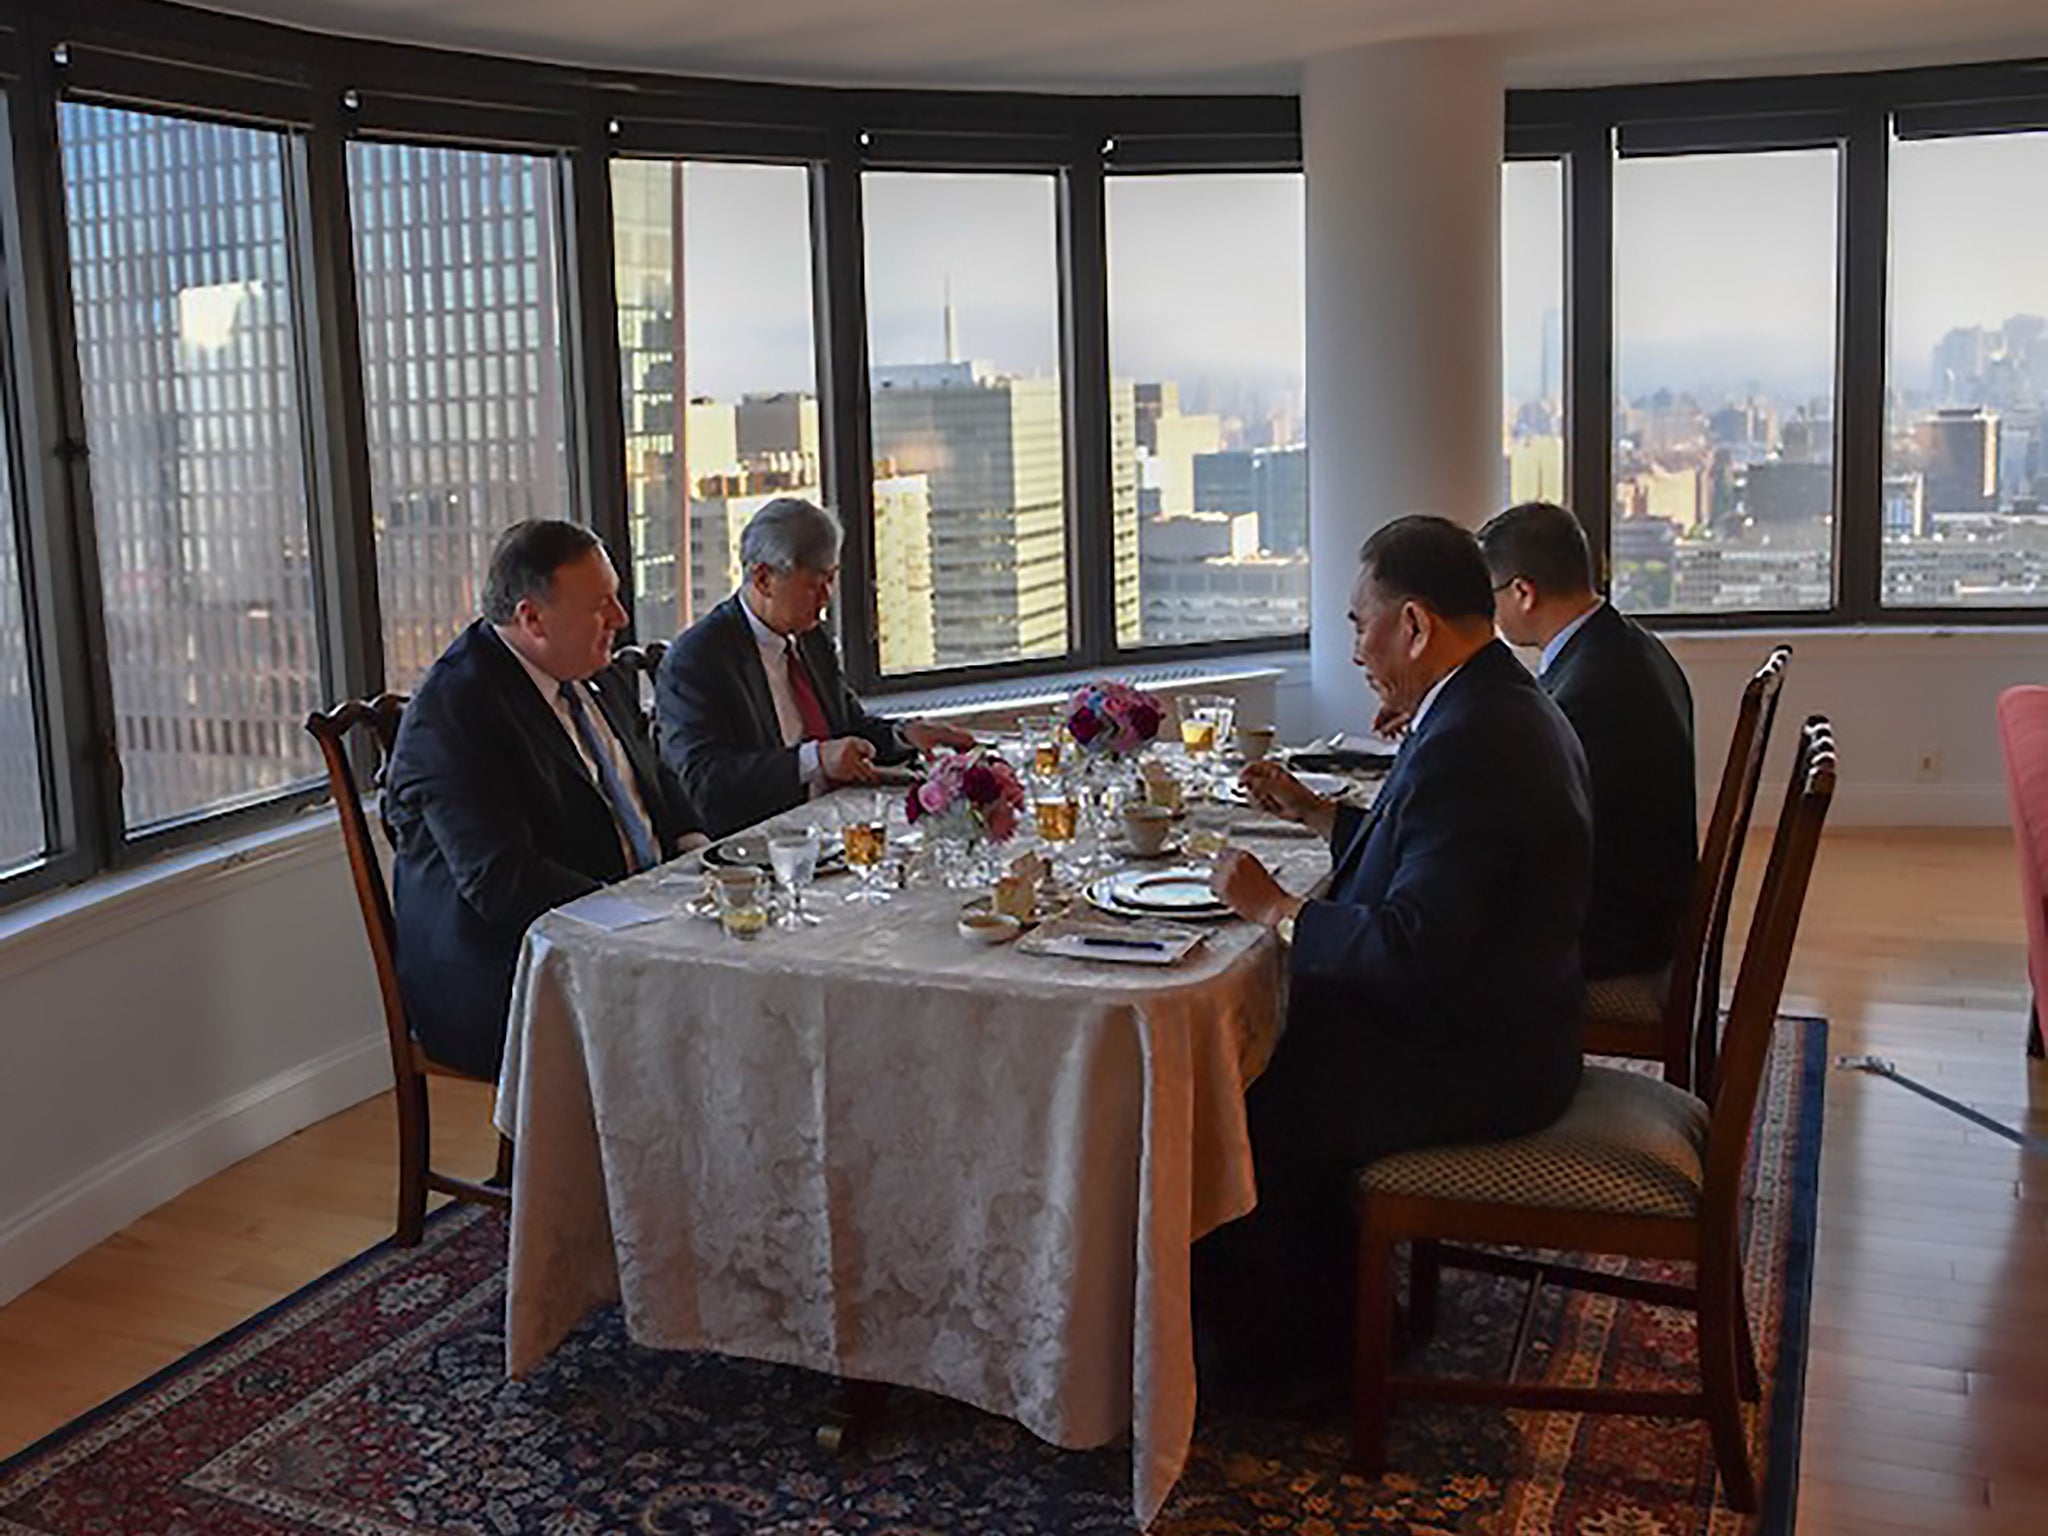 Kim Yong-chol, vice chairman of North Korea, during his dinner meeting with the US secretary of state, Mike Pompeo, in New York